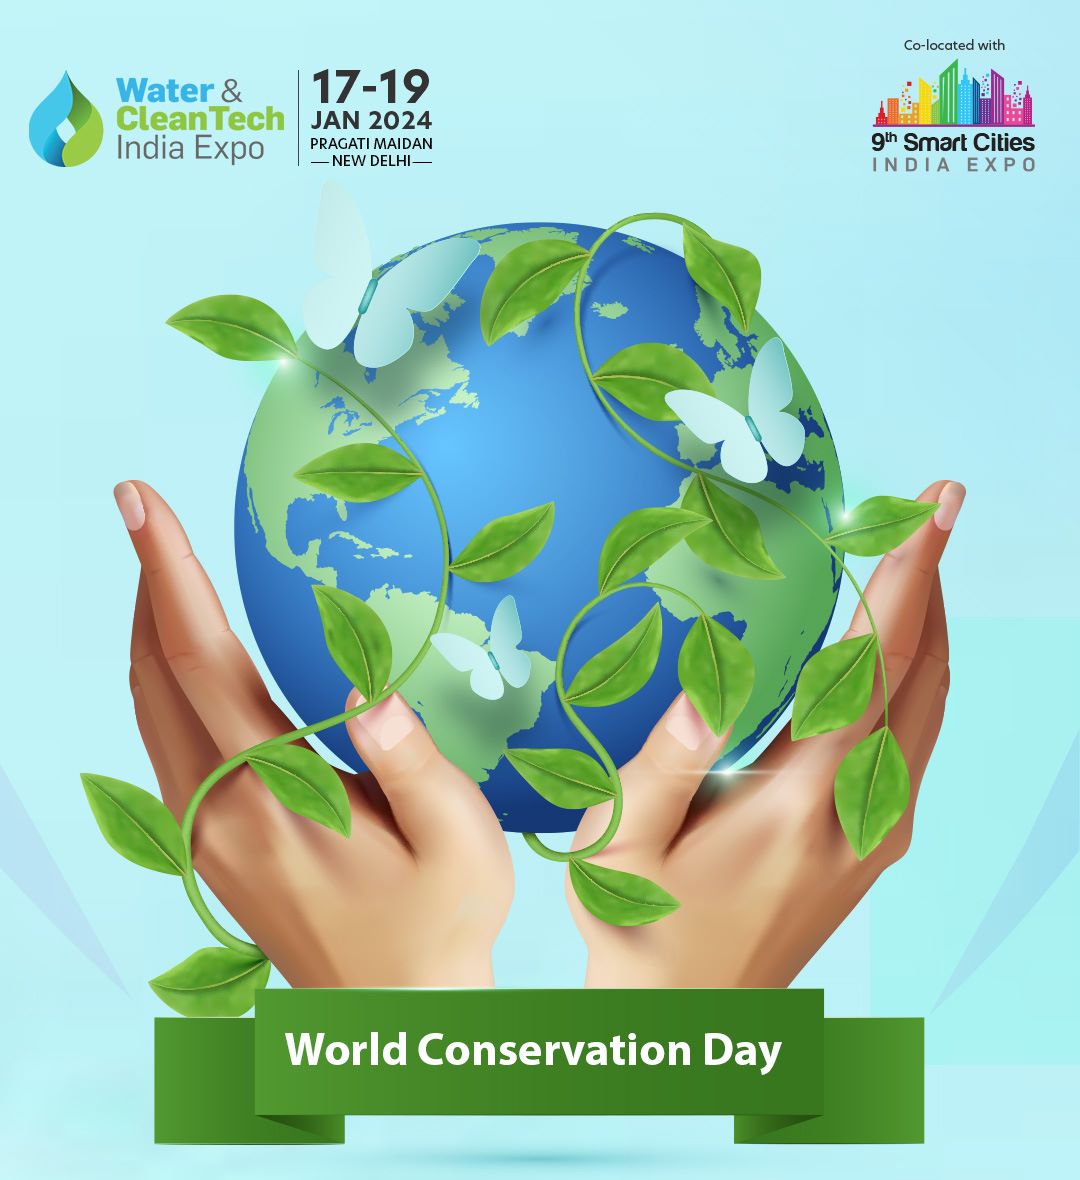 Happy #WorldConservationDay! 🌱 

Let's come together to preserve our precious resources! Join us at Water and Cleantech India Expo to explore #SustainableSolutions and pave the way for a #GreeneFuture
Together, we can make a difference! 

Visit at waterandcleantechexpo.com